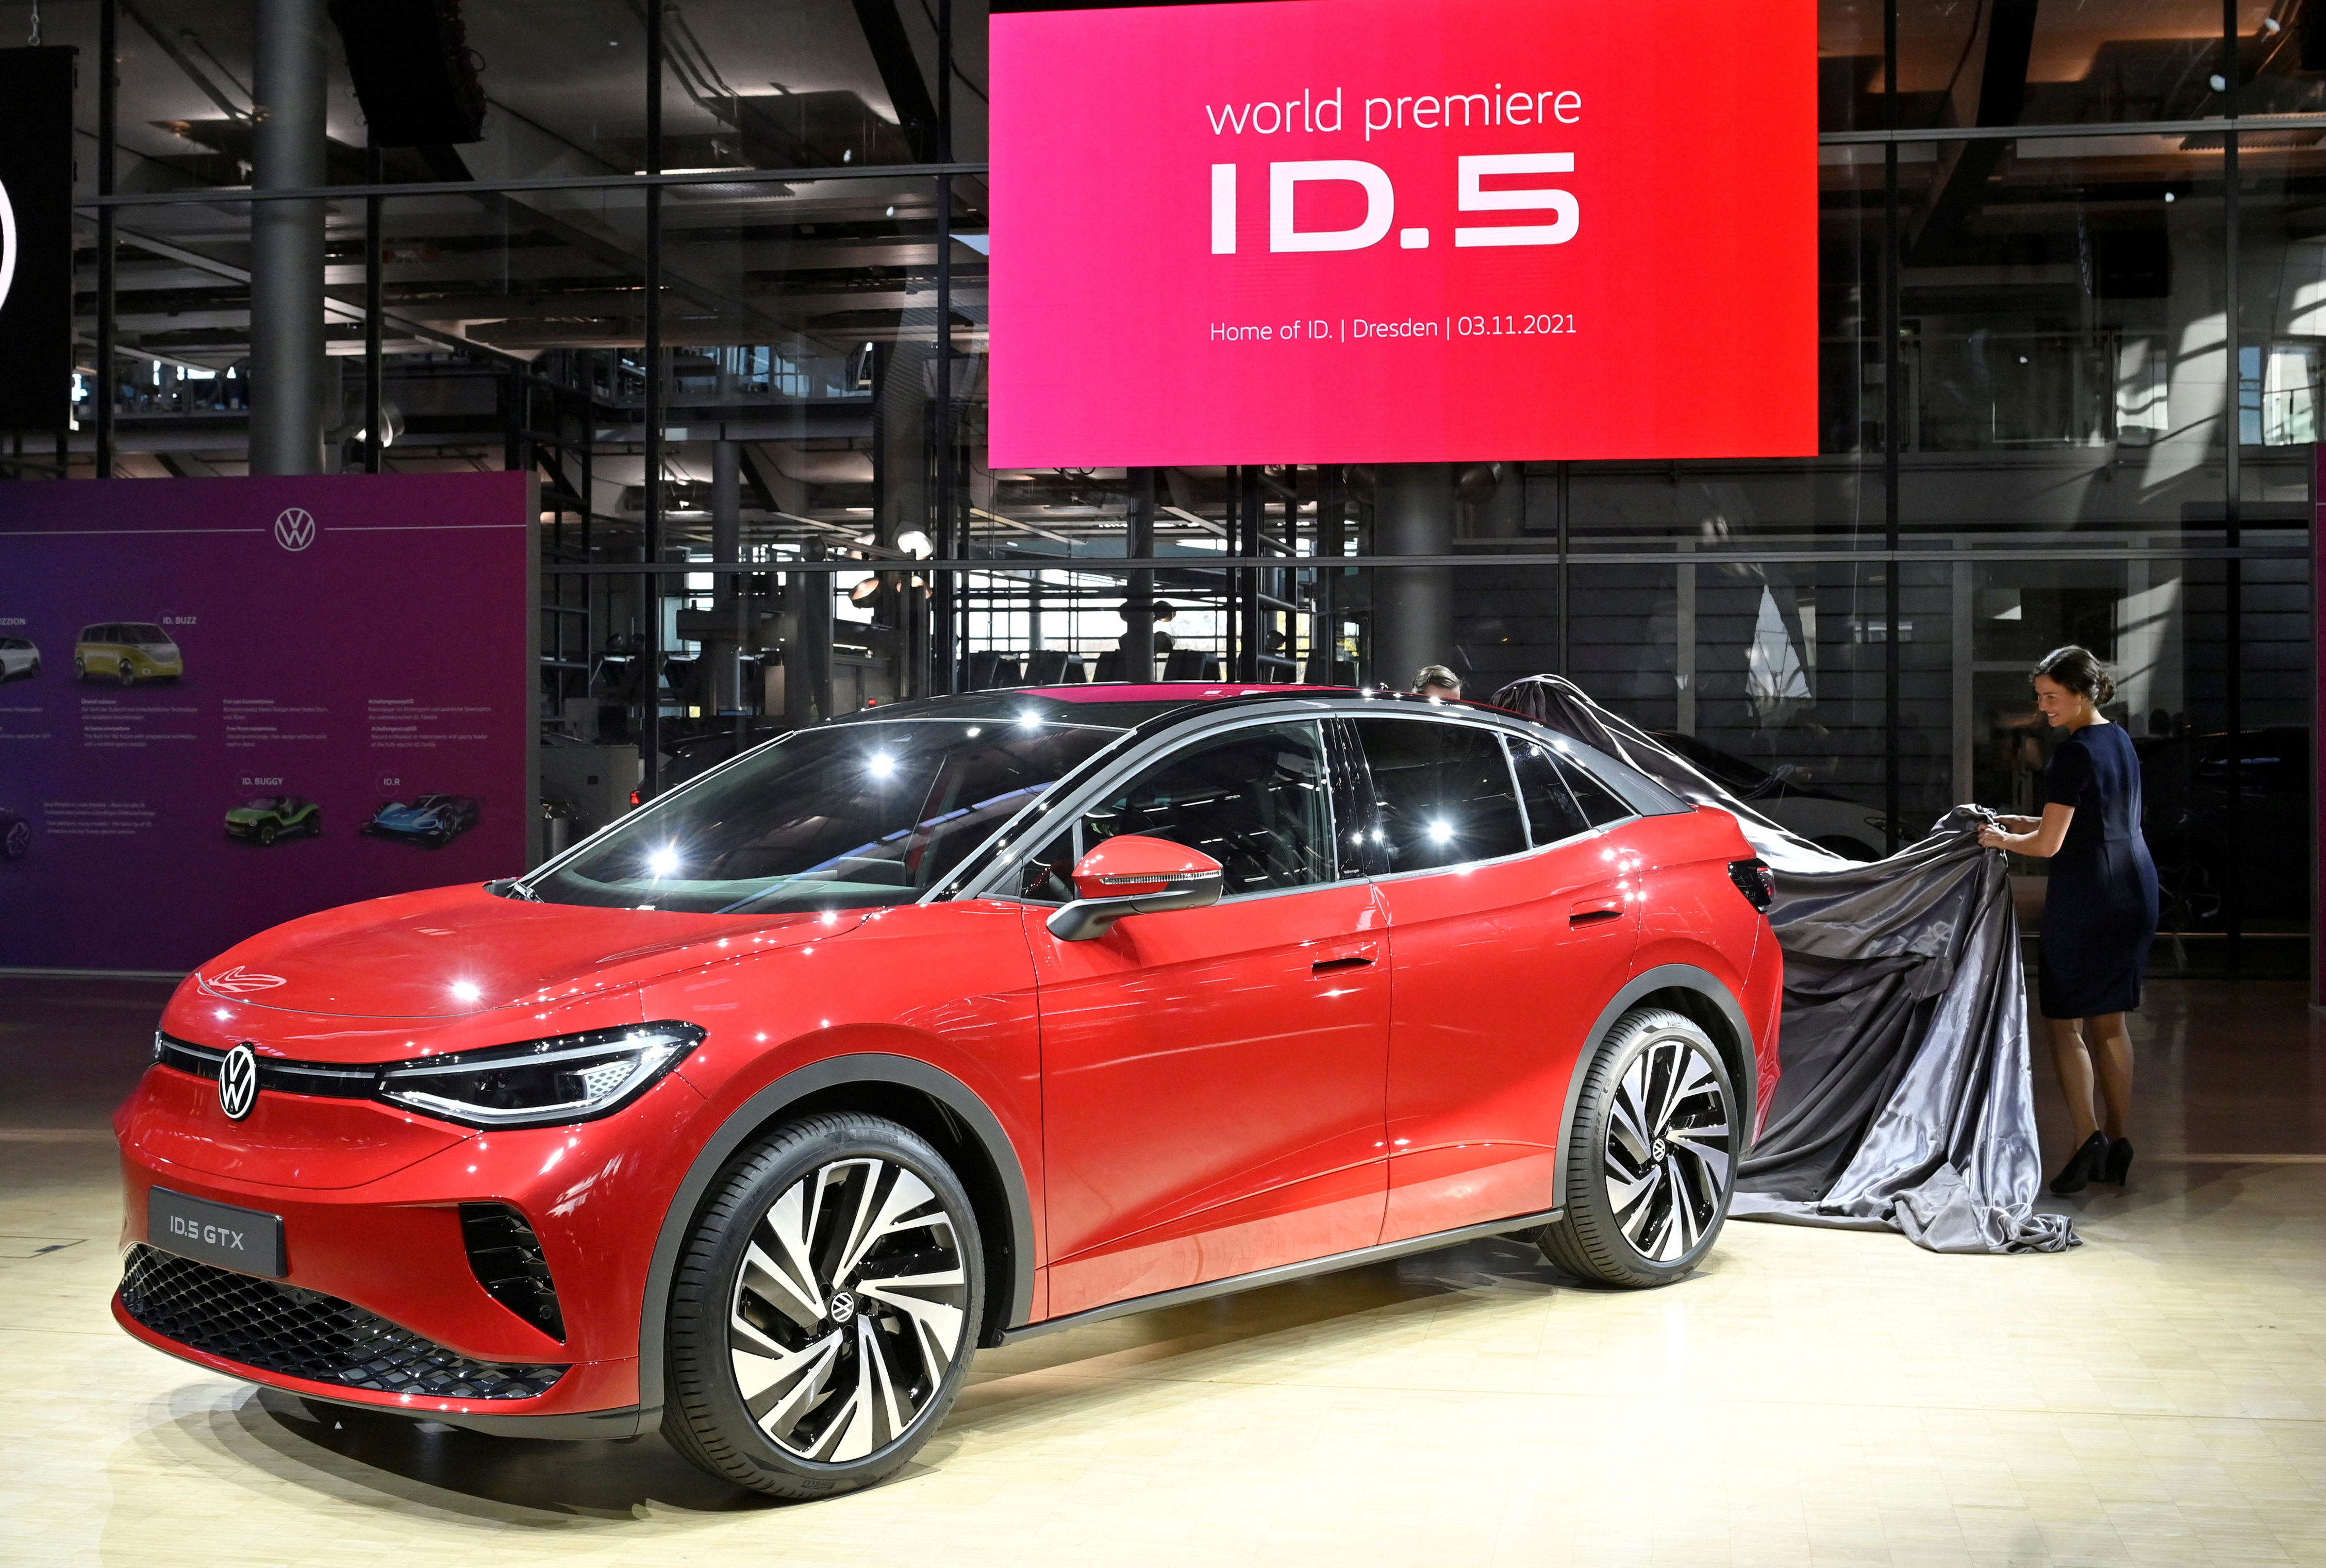 VW presents its electric SUV ID.5 in Dresden